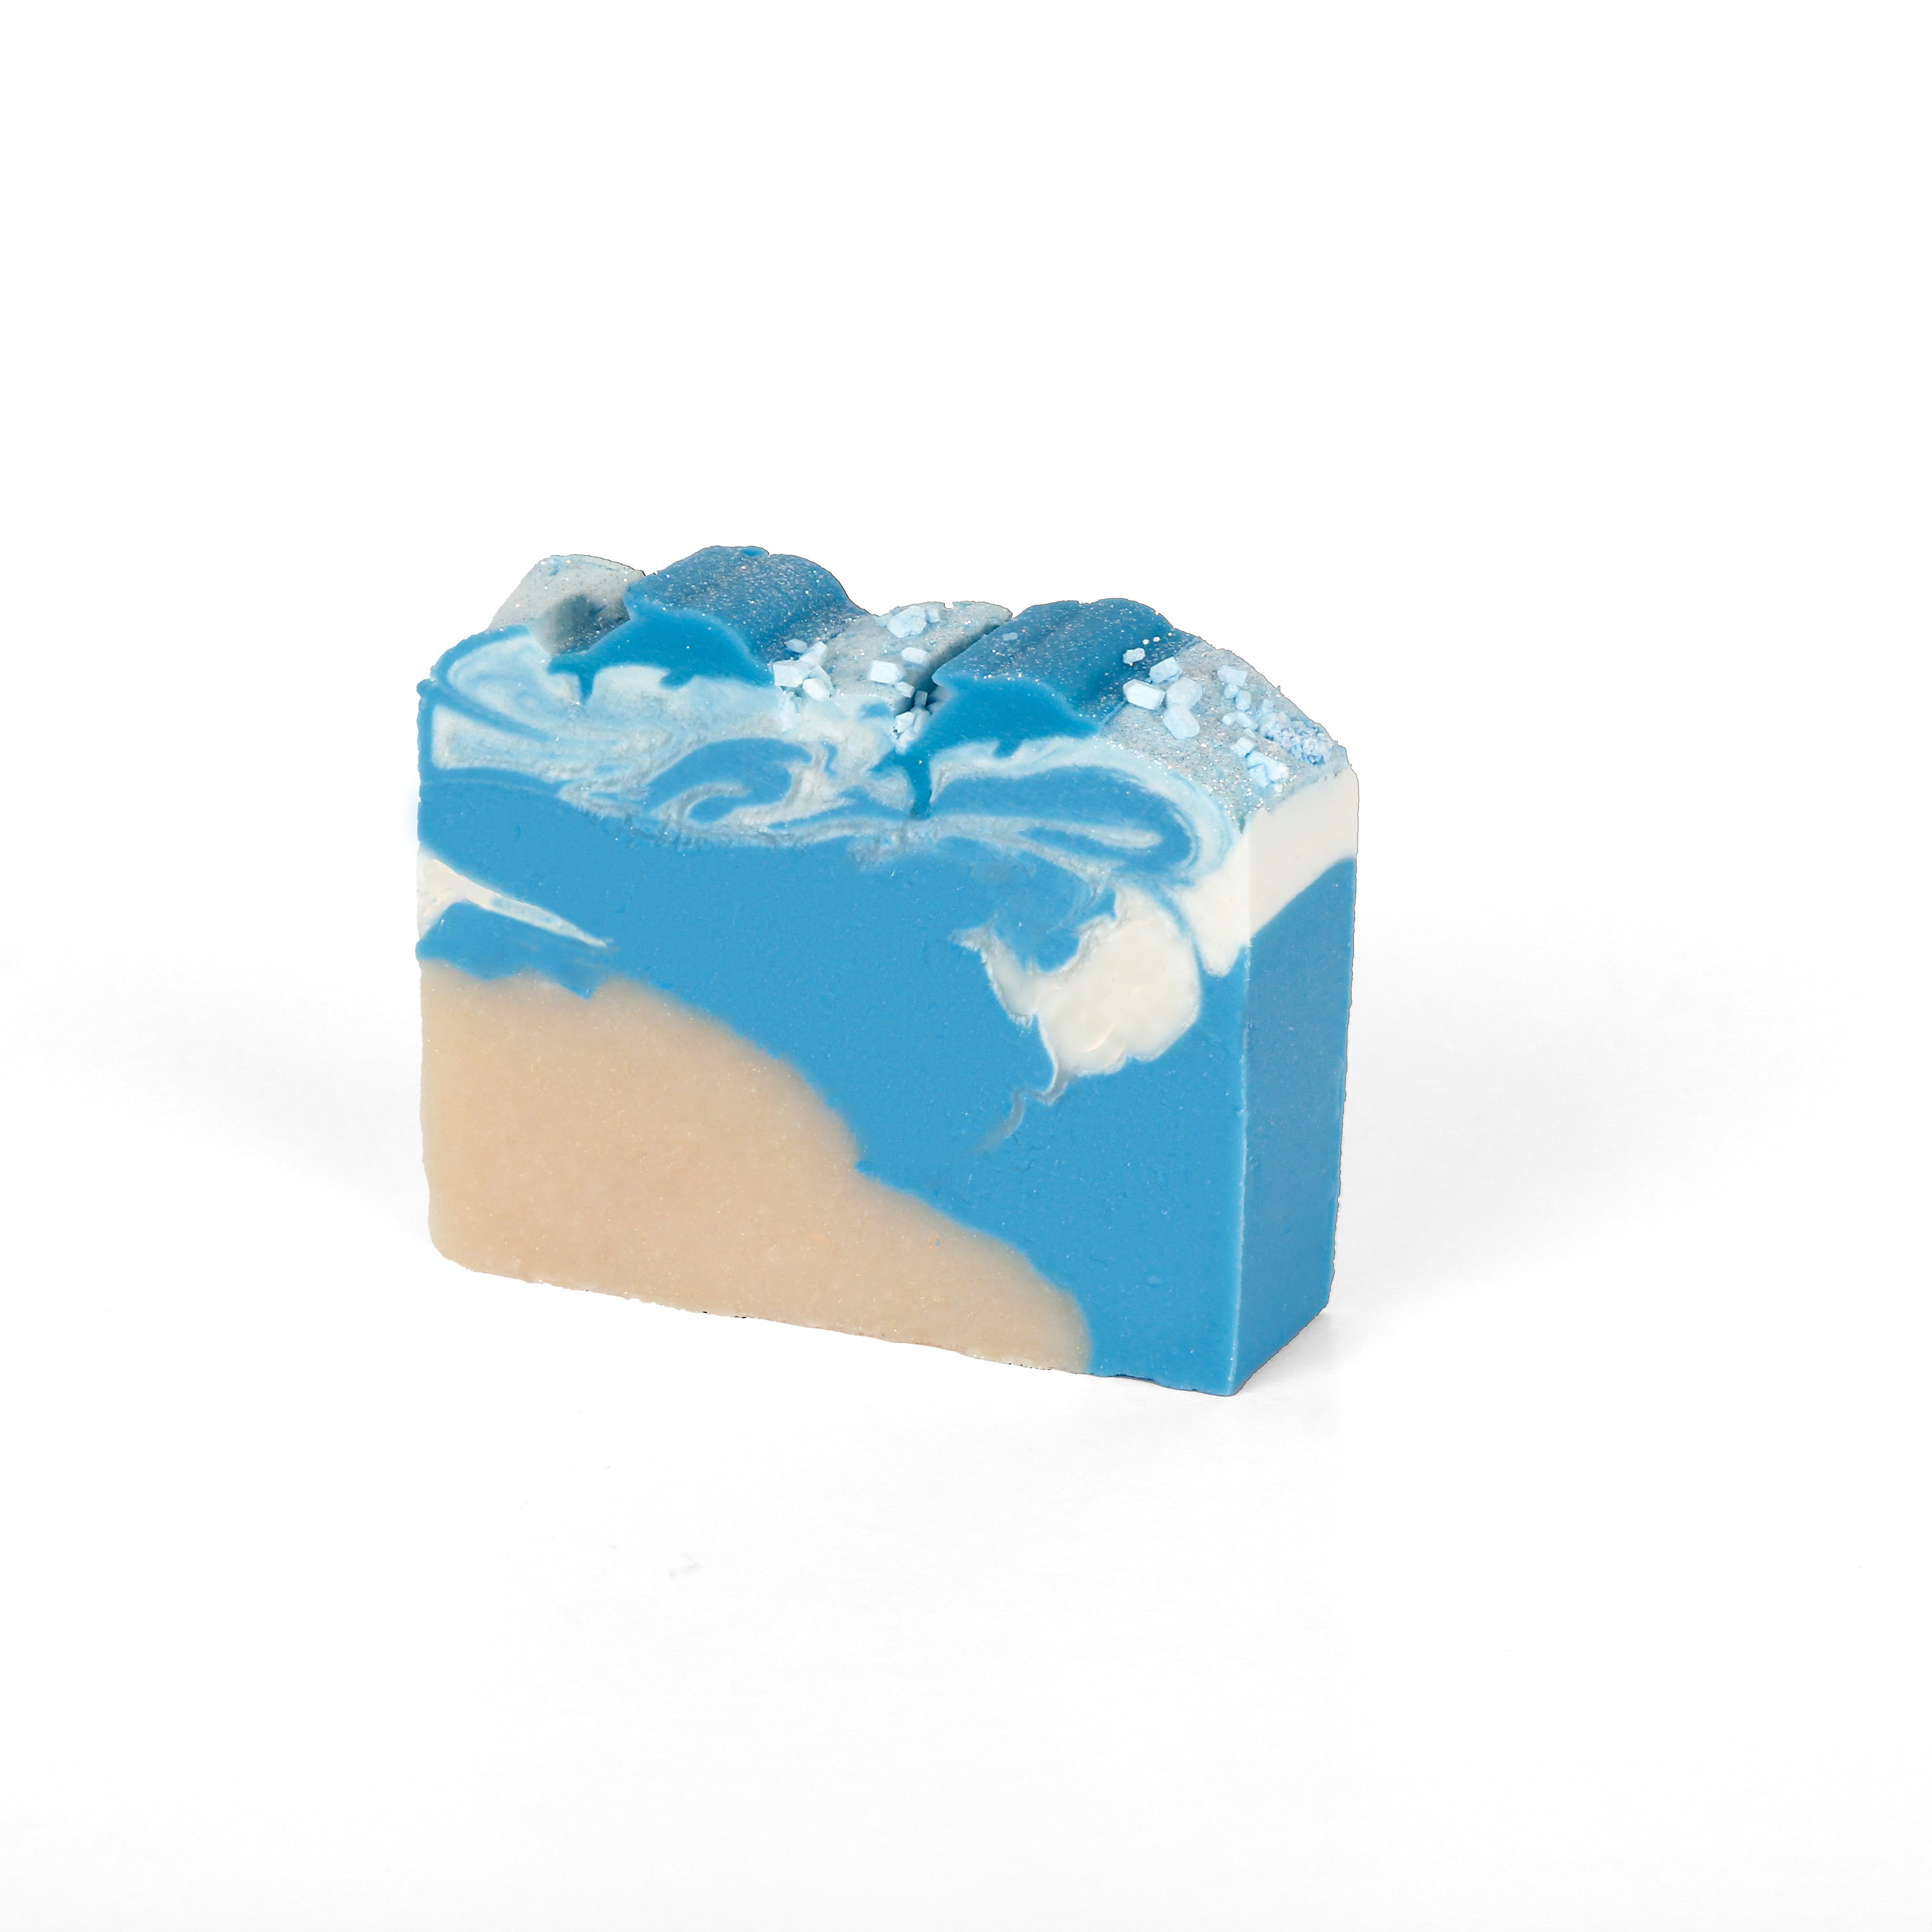 A blue and cream colored swirled bar soap. WIth a fluffy wave like texture on the top to portray ocean waves.